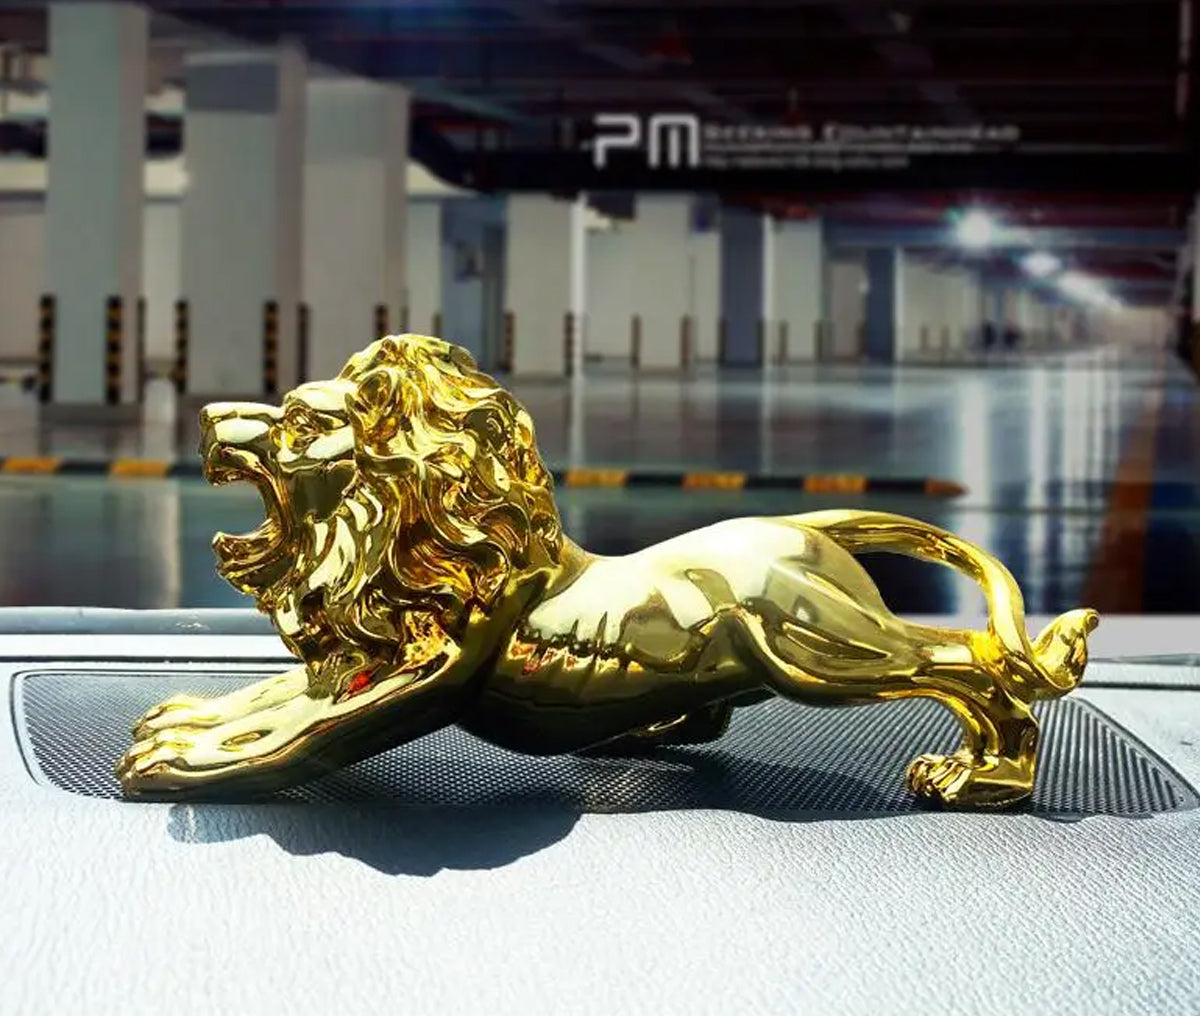 Golden Metal Lion Statue - Car Dashboard, Home & Office Decor (Free Pakistan Delivery)